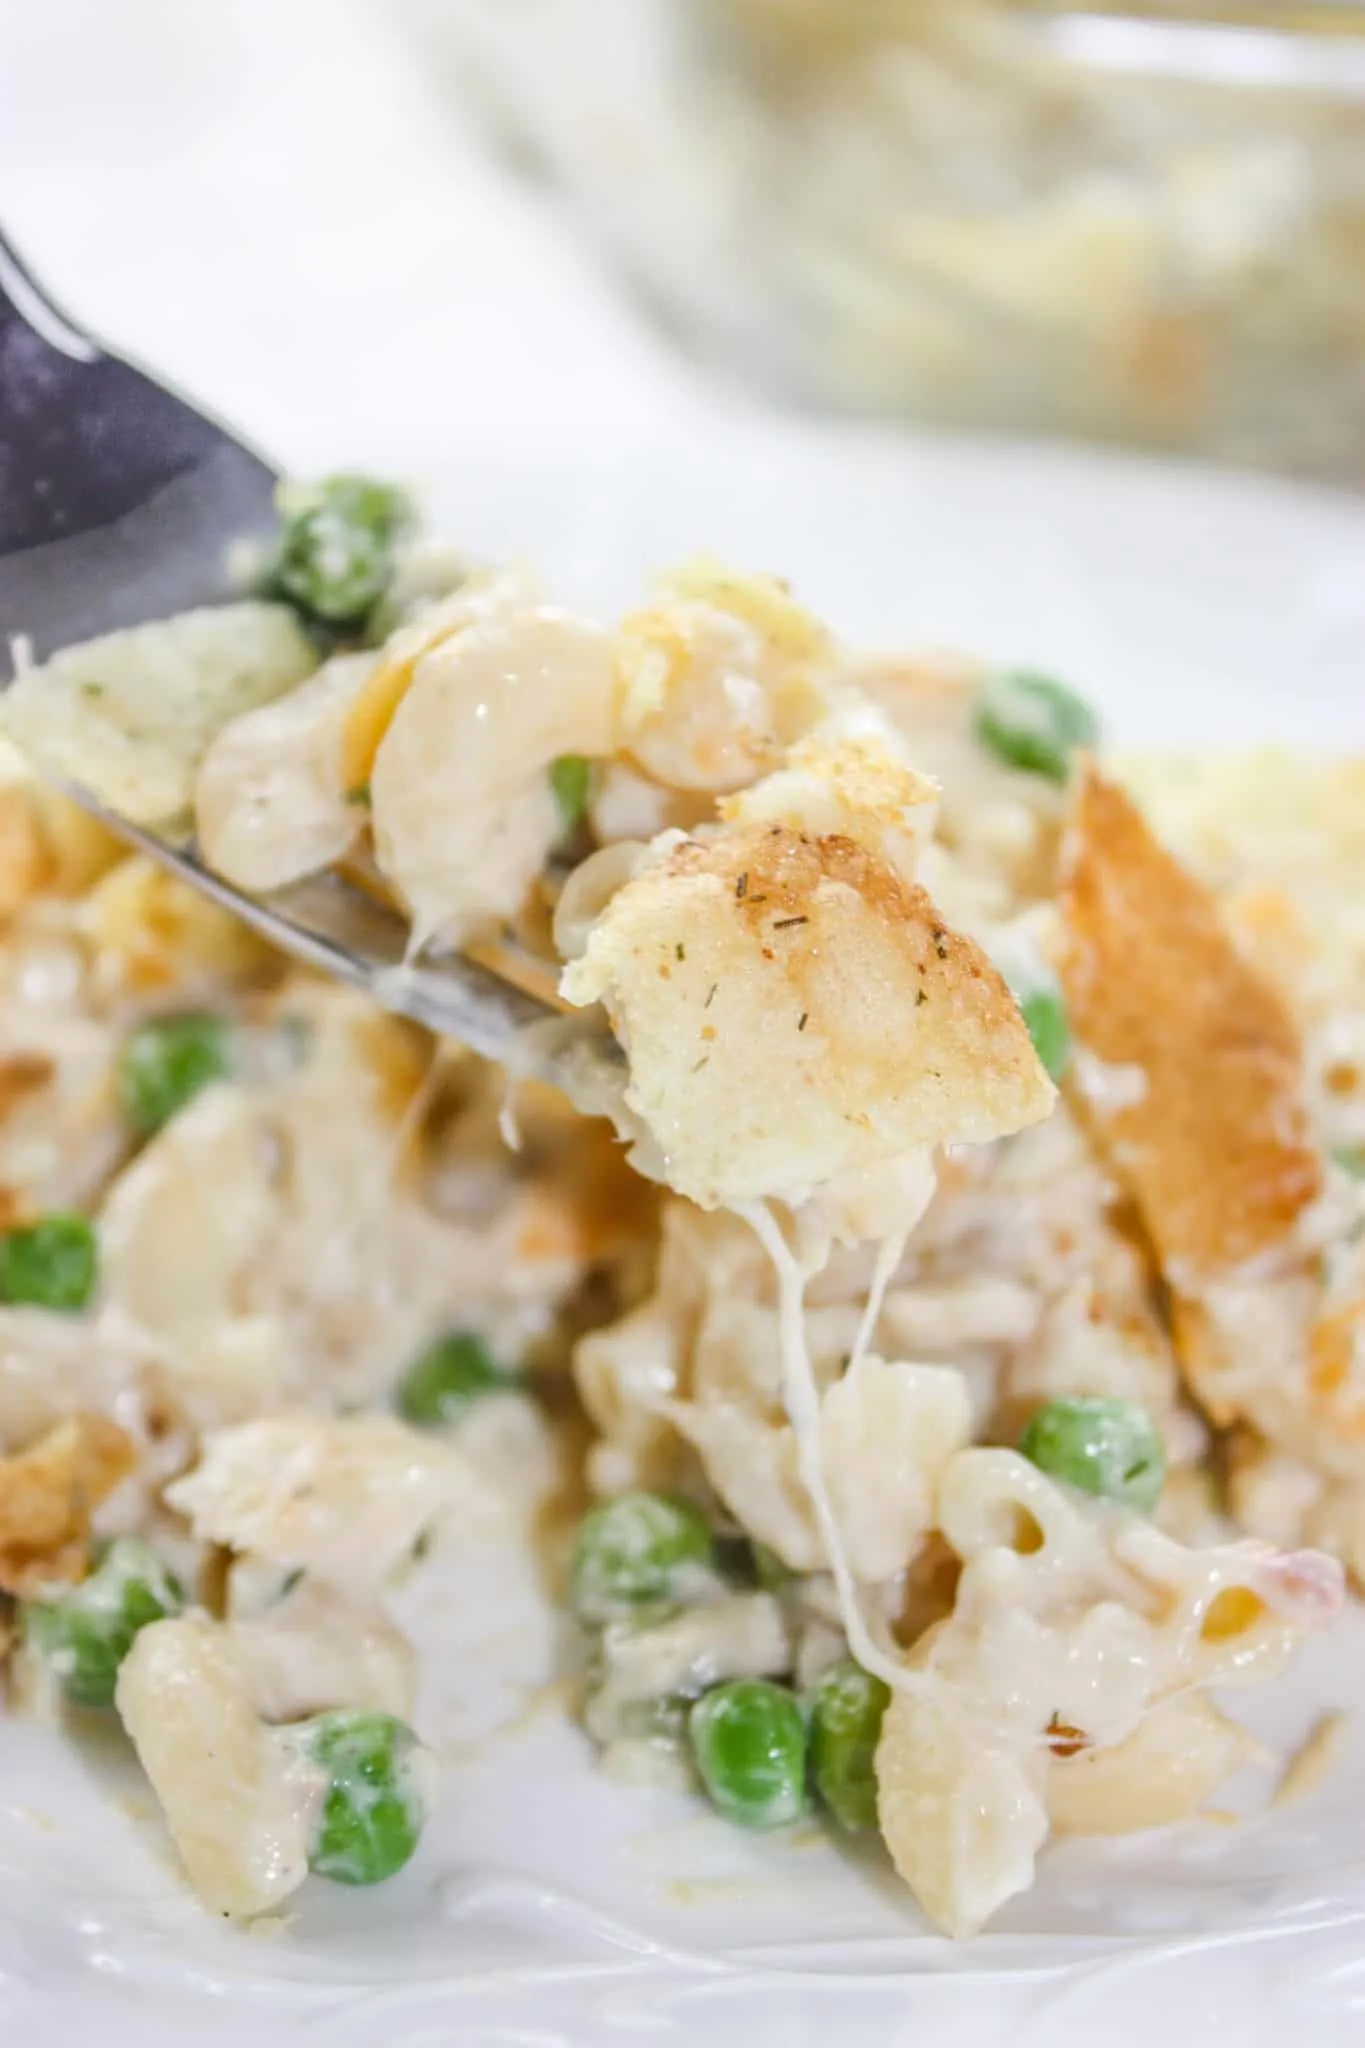 Gluten Free Tuna Casserole is an easy dinner recipe that combines canned tuna with cheesy pasta and frozen peas. This gluten free version of a family staple will not disappoint!